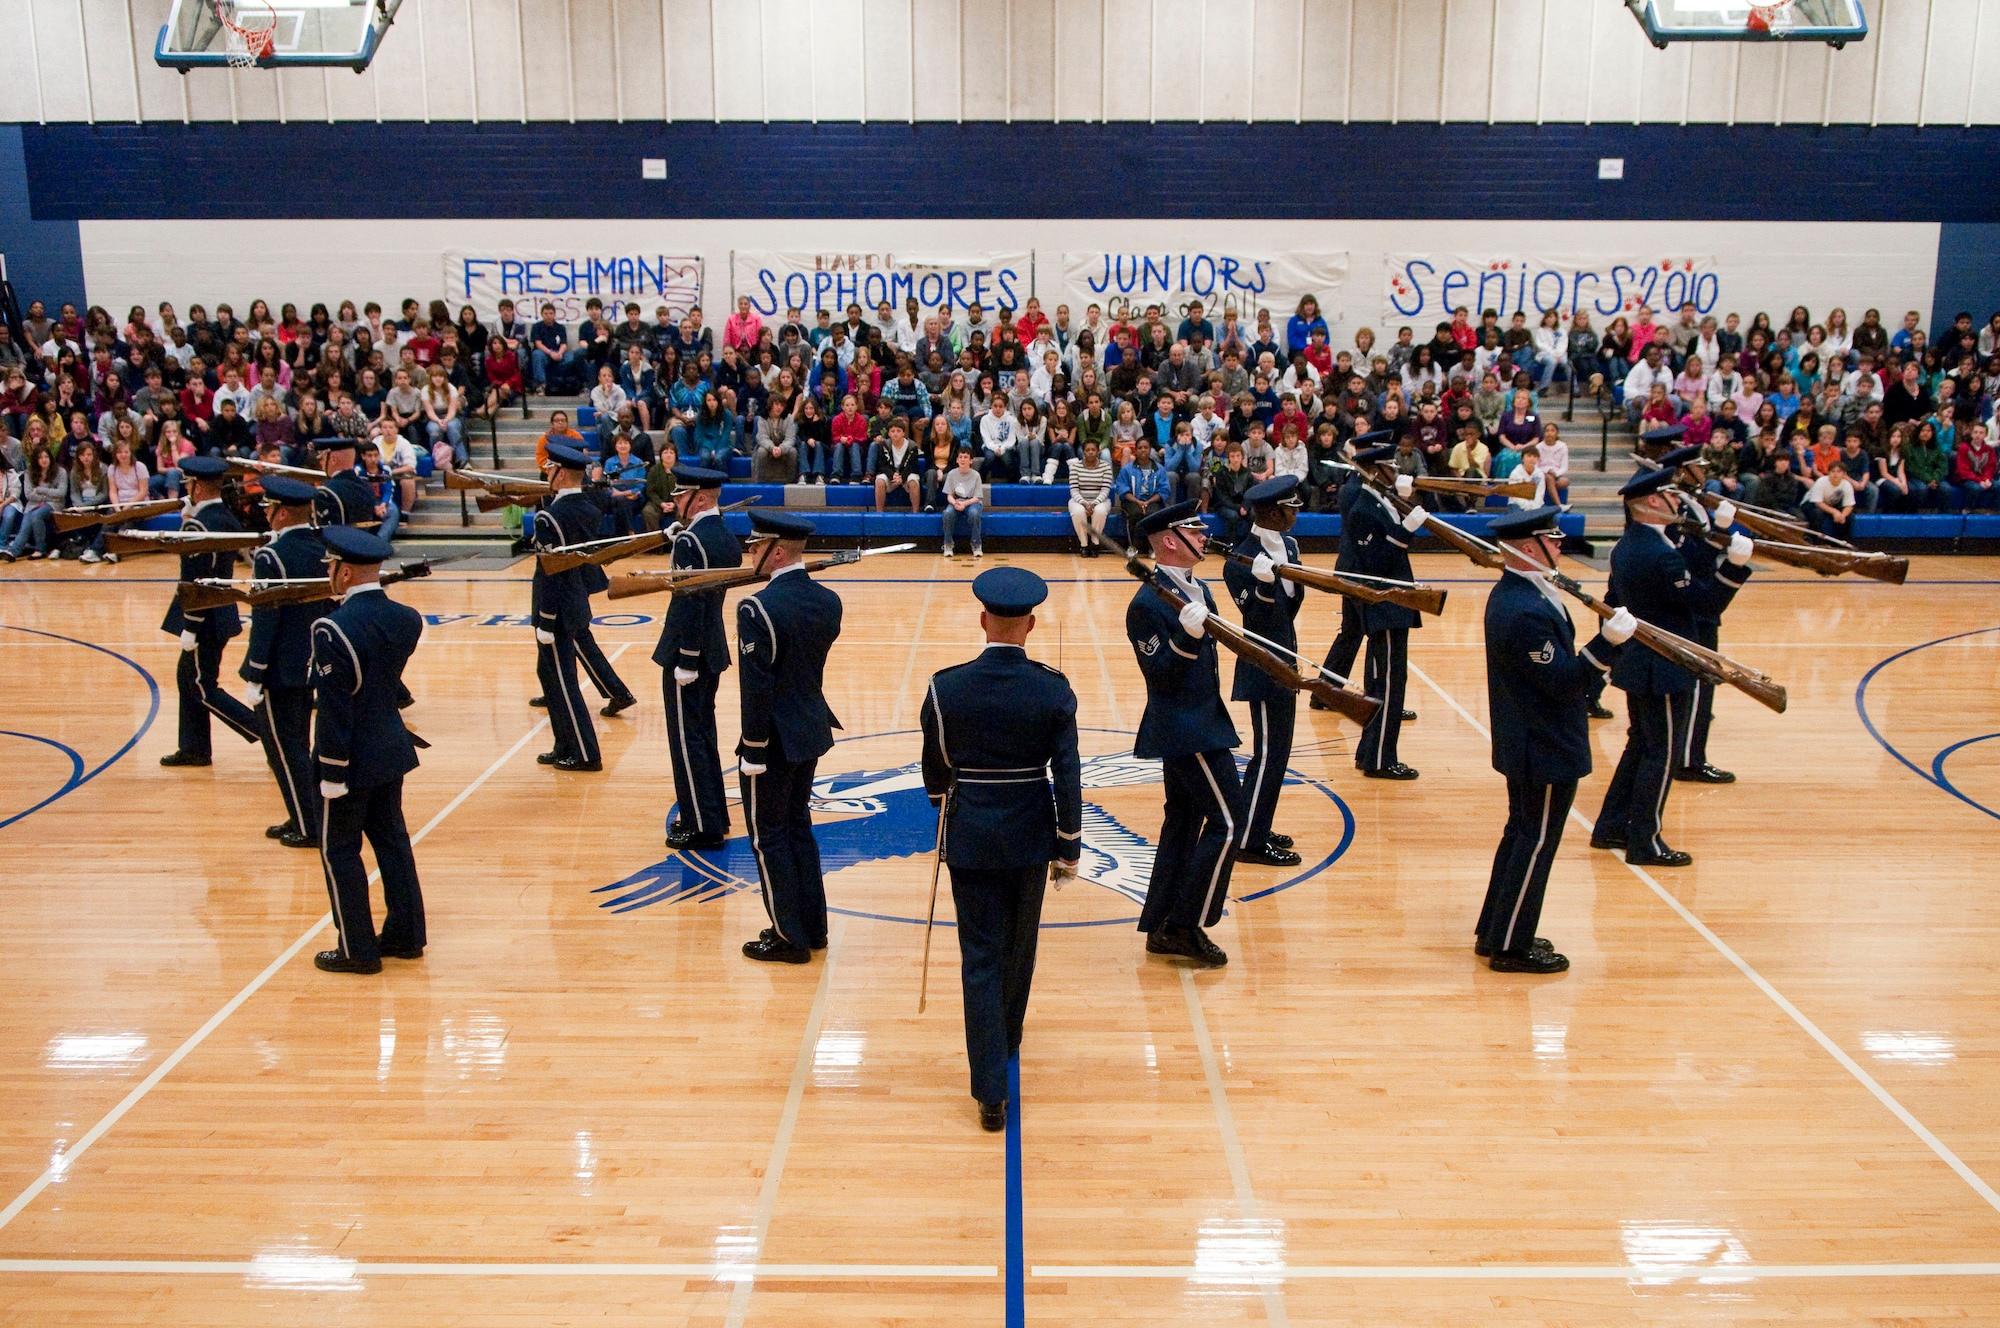 Members of the U.S. Air Force Honor Guard Drill Team perform for students of Randolph Middle School during an assembly Nov. 2. (U.S. Air Force photo/Steve Thurow)